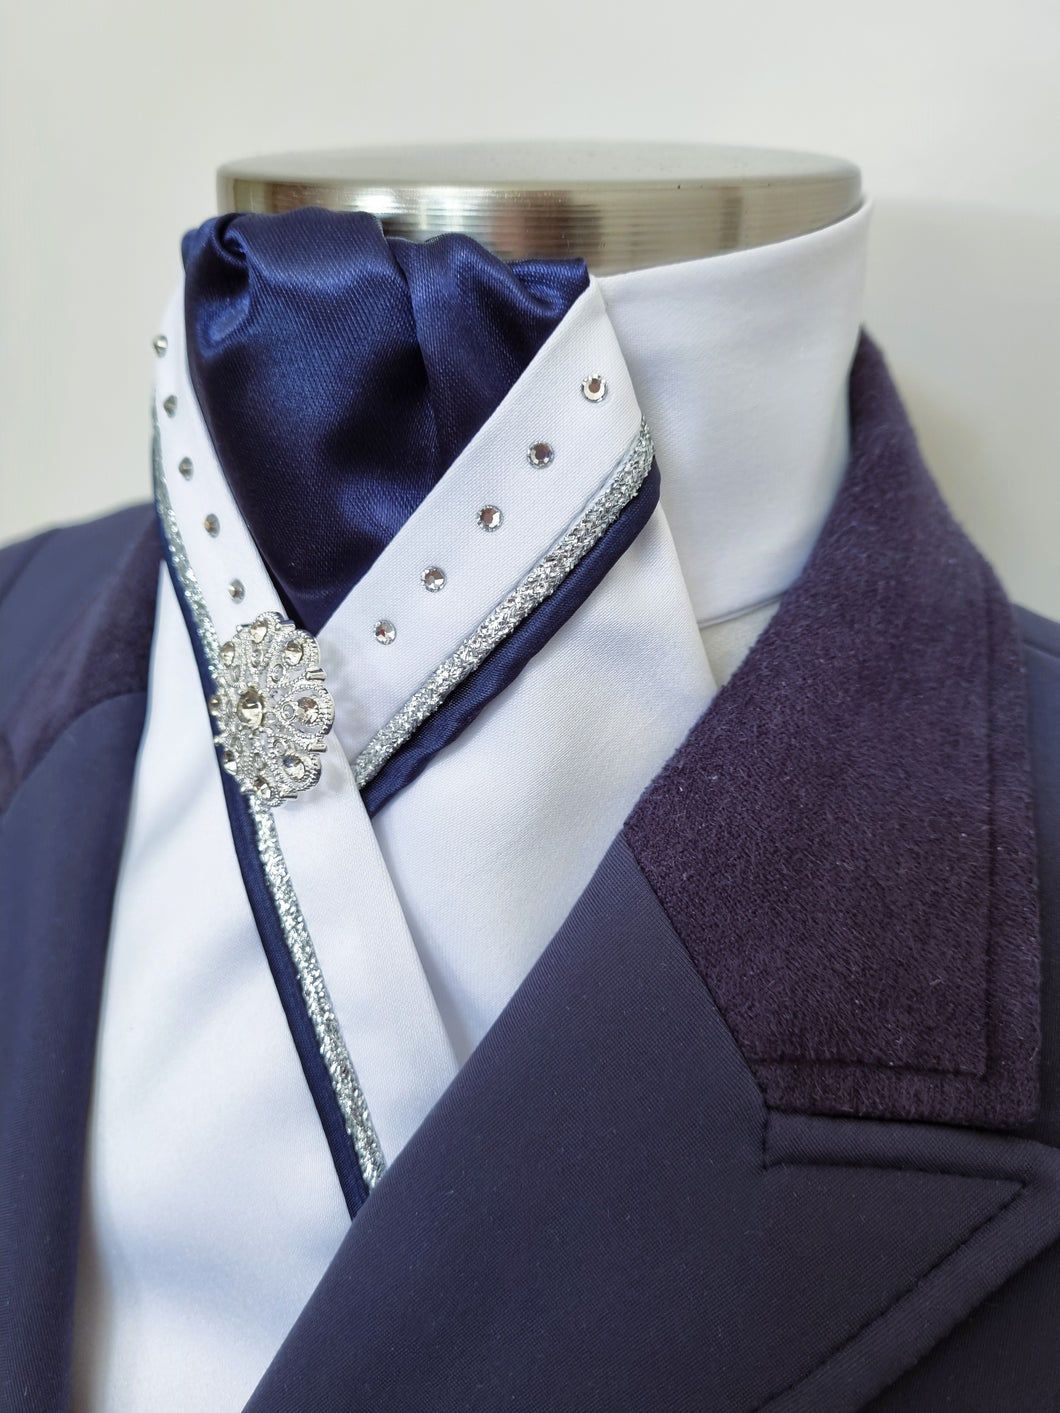 SOPHIE Stock tie - White & navy with silver & navy piping, crystals and silver brooch